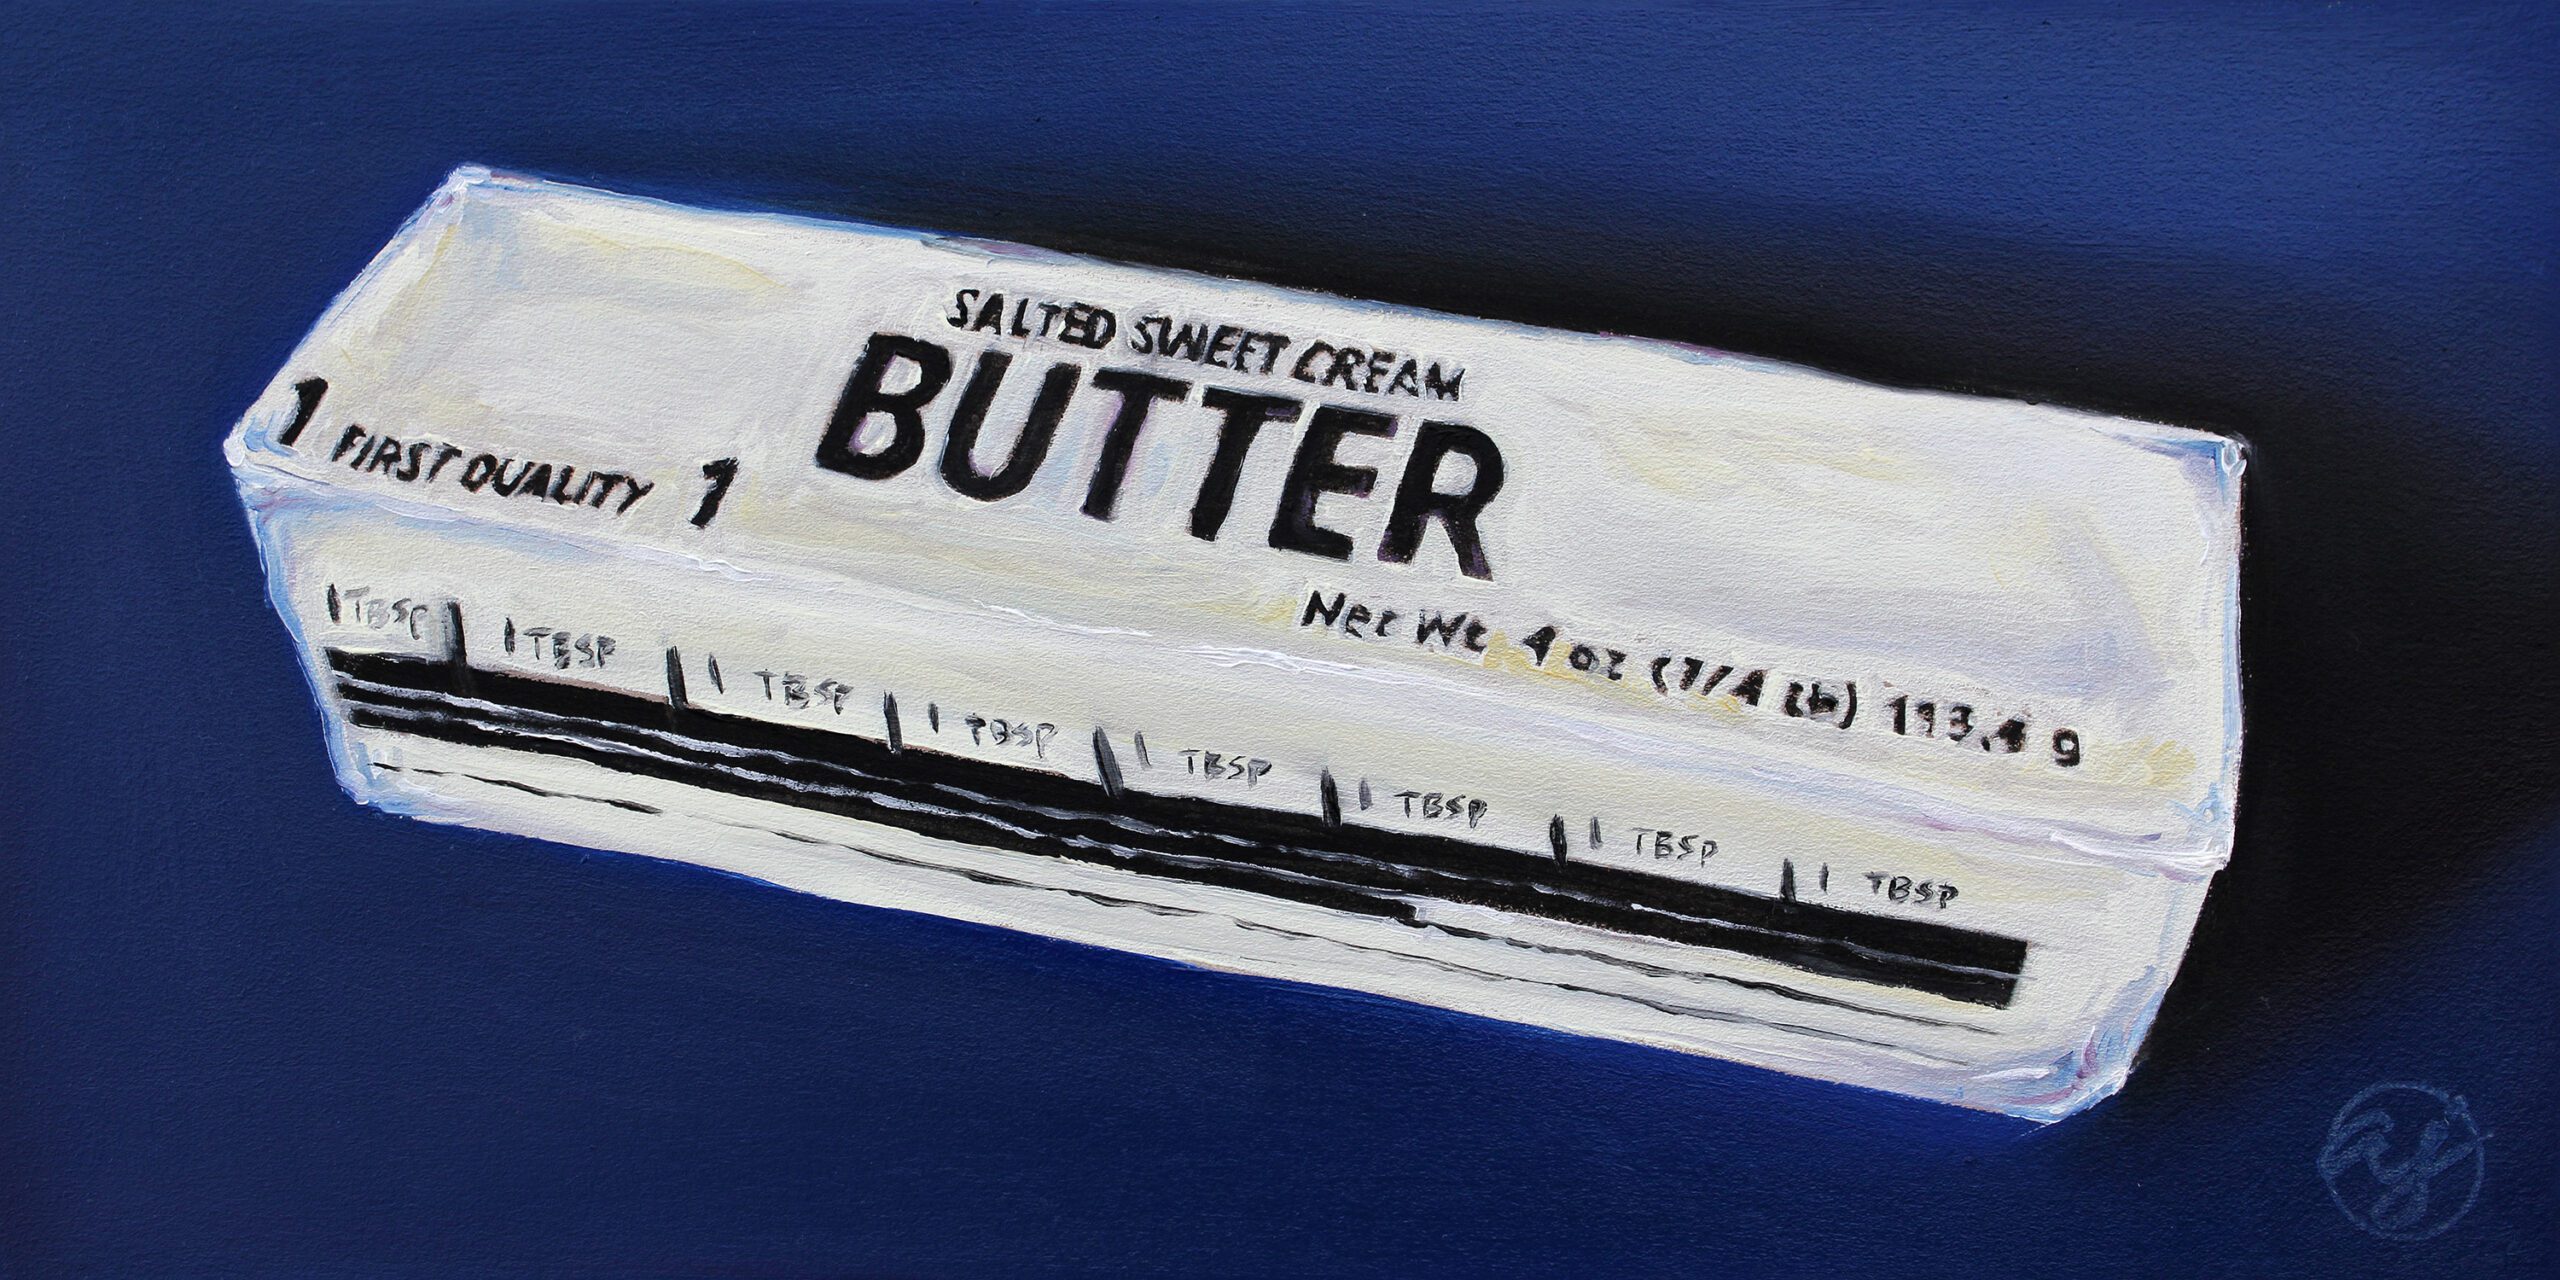 "Butter" 6x12 Original Oil Painting by Abra Johnson